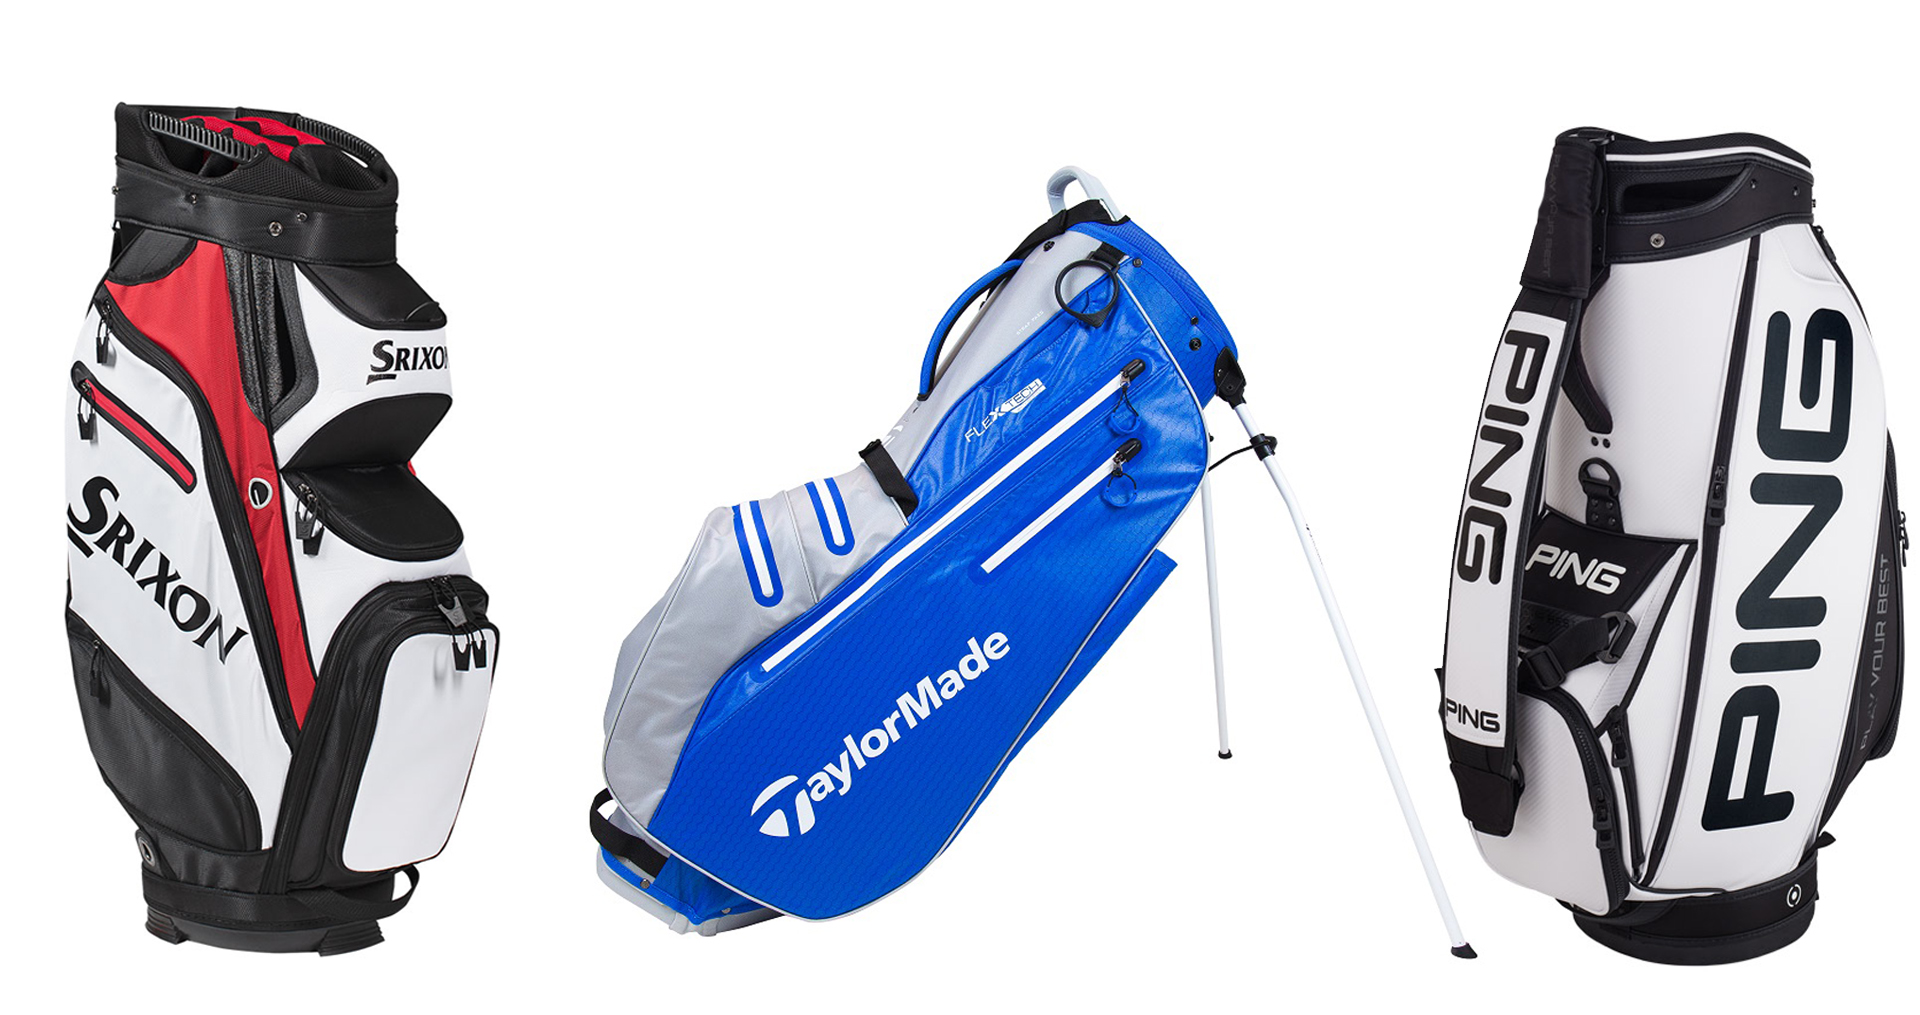 Aggregate more than 82 best cart bags for golf best - in.cdgdbentre